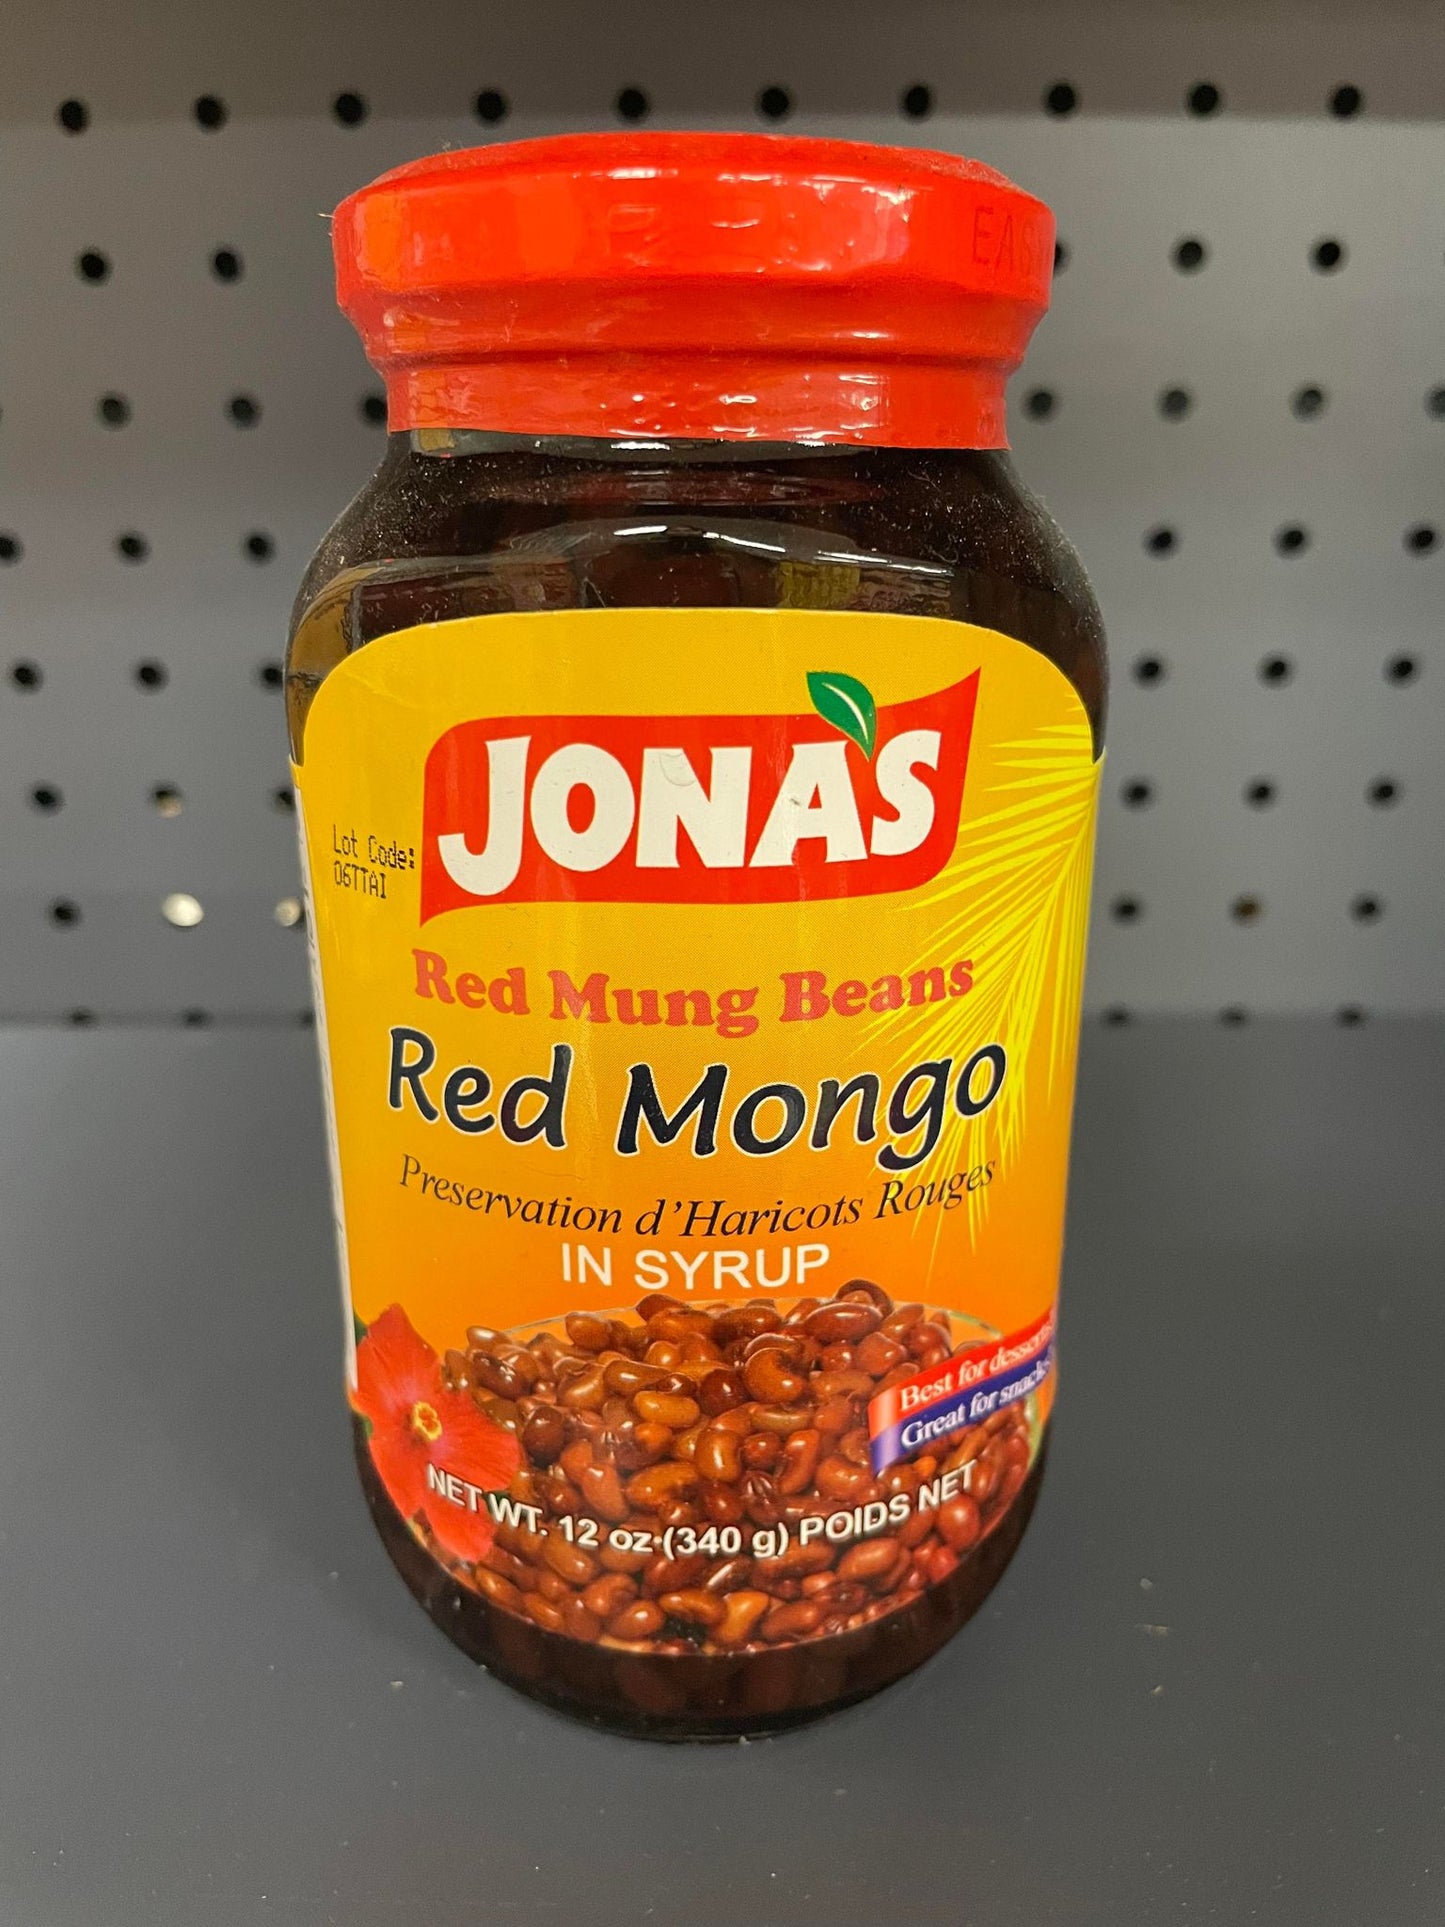 JONAS RED MUNG BEANS IN SYRUP